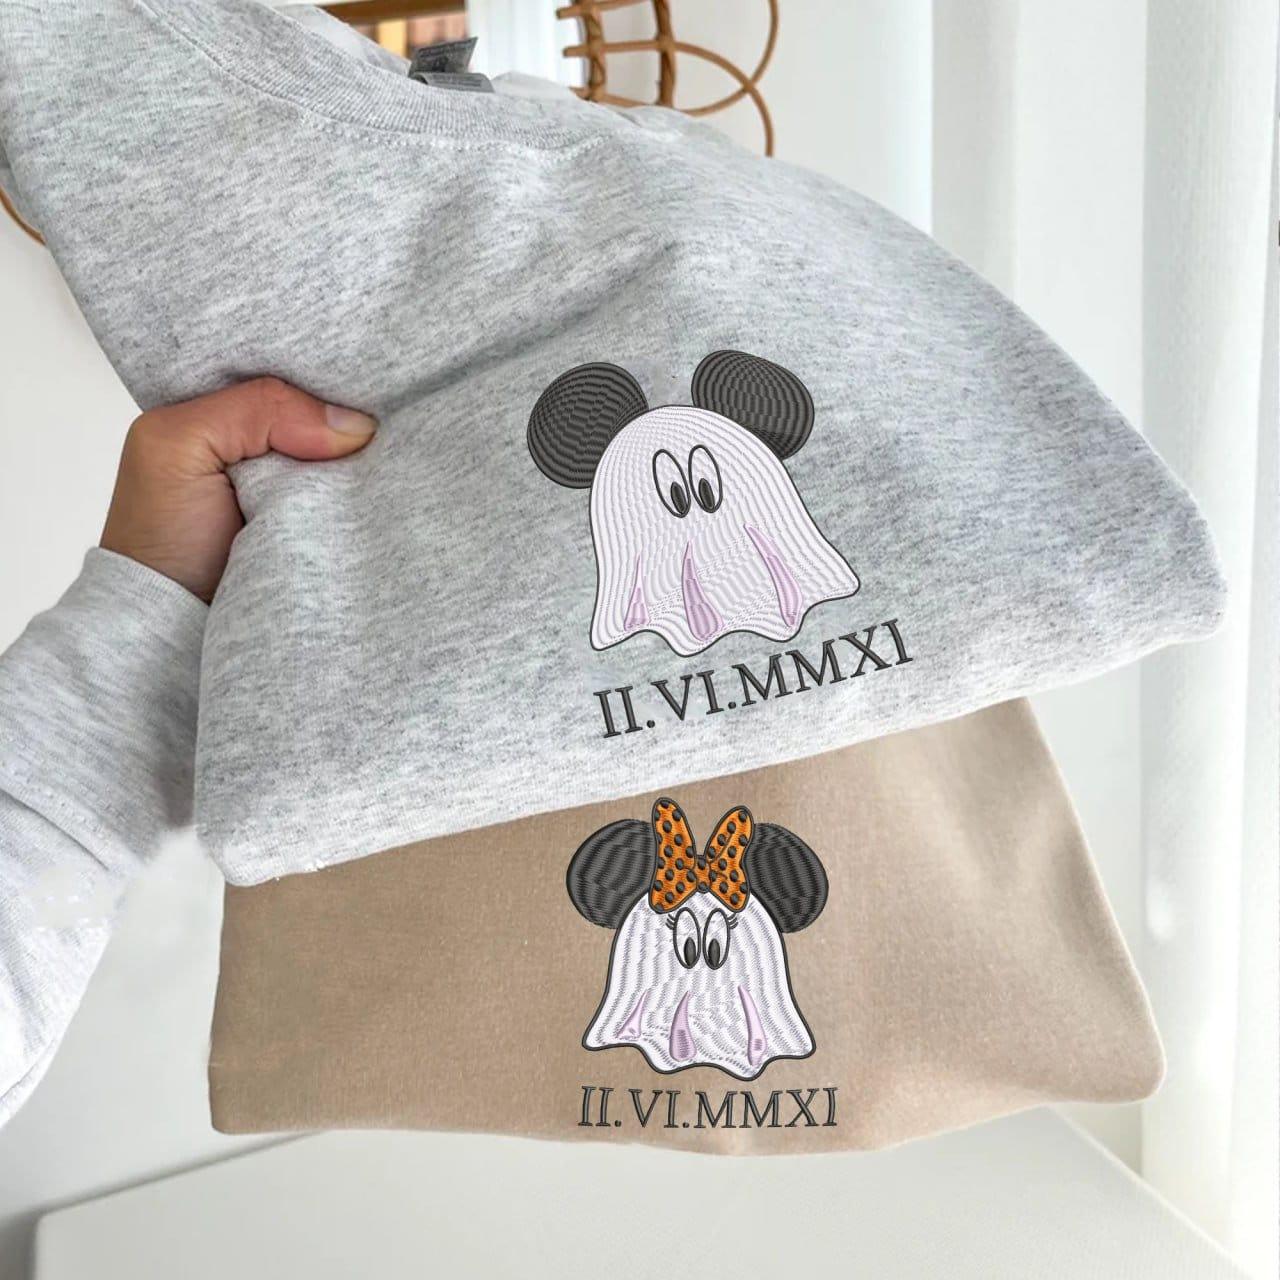 Custom Embroidered Halloweeen Hoodies For Couples, Custom Matching Couple Hoodies, Spooky Mouse Ghost Couples Roman Numeral Date Hoodie